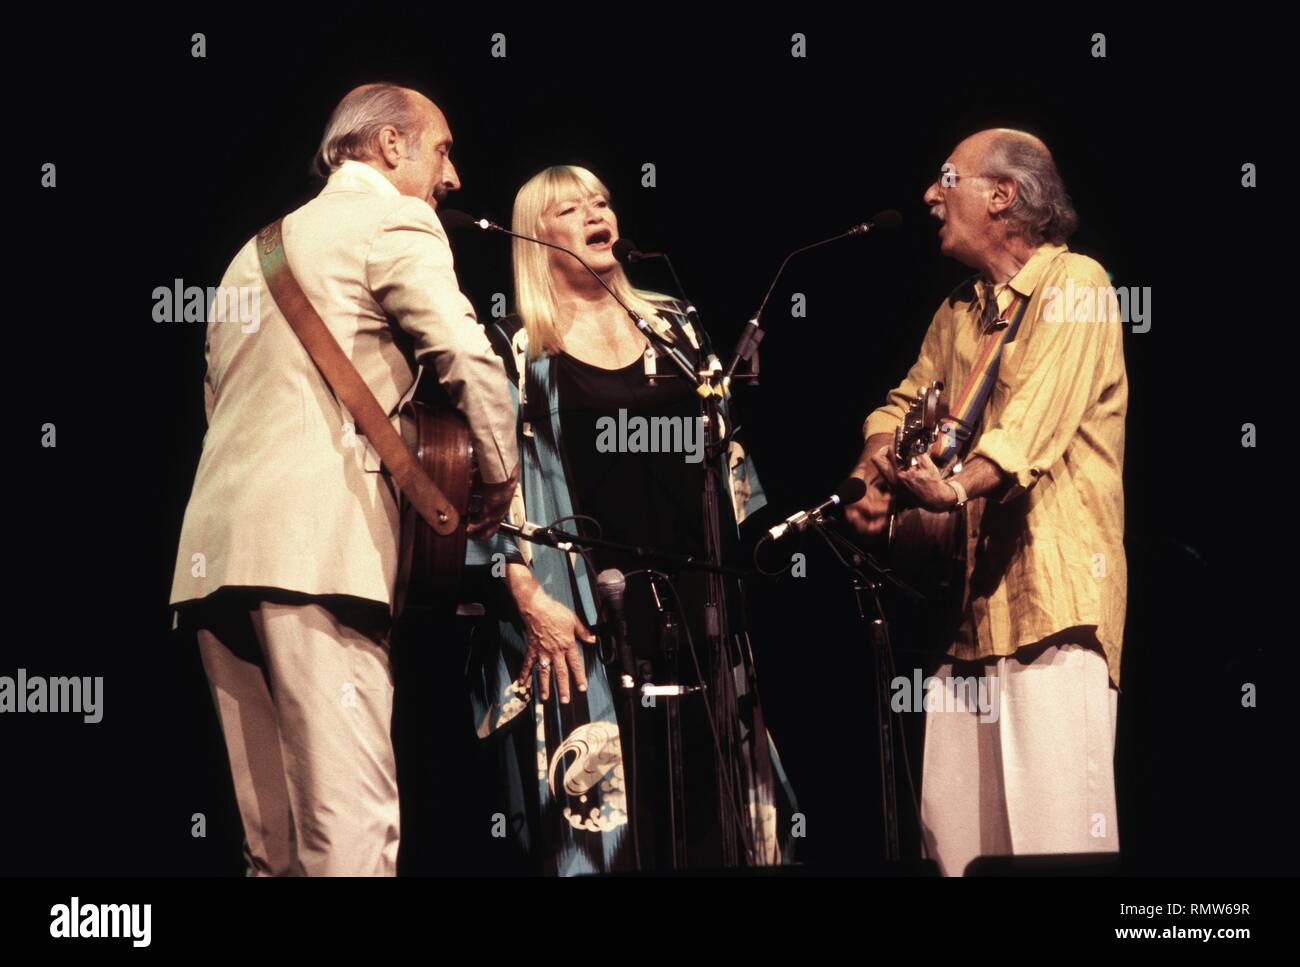 The folk singing trio of Peter, Paul and Mary are shown performing on stage during a "live" concert appearance. Stock Photo